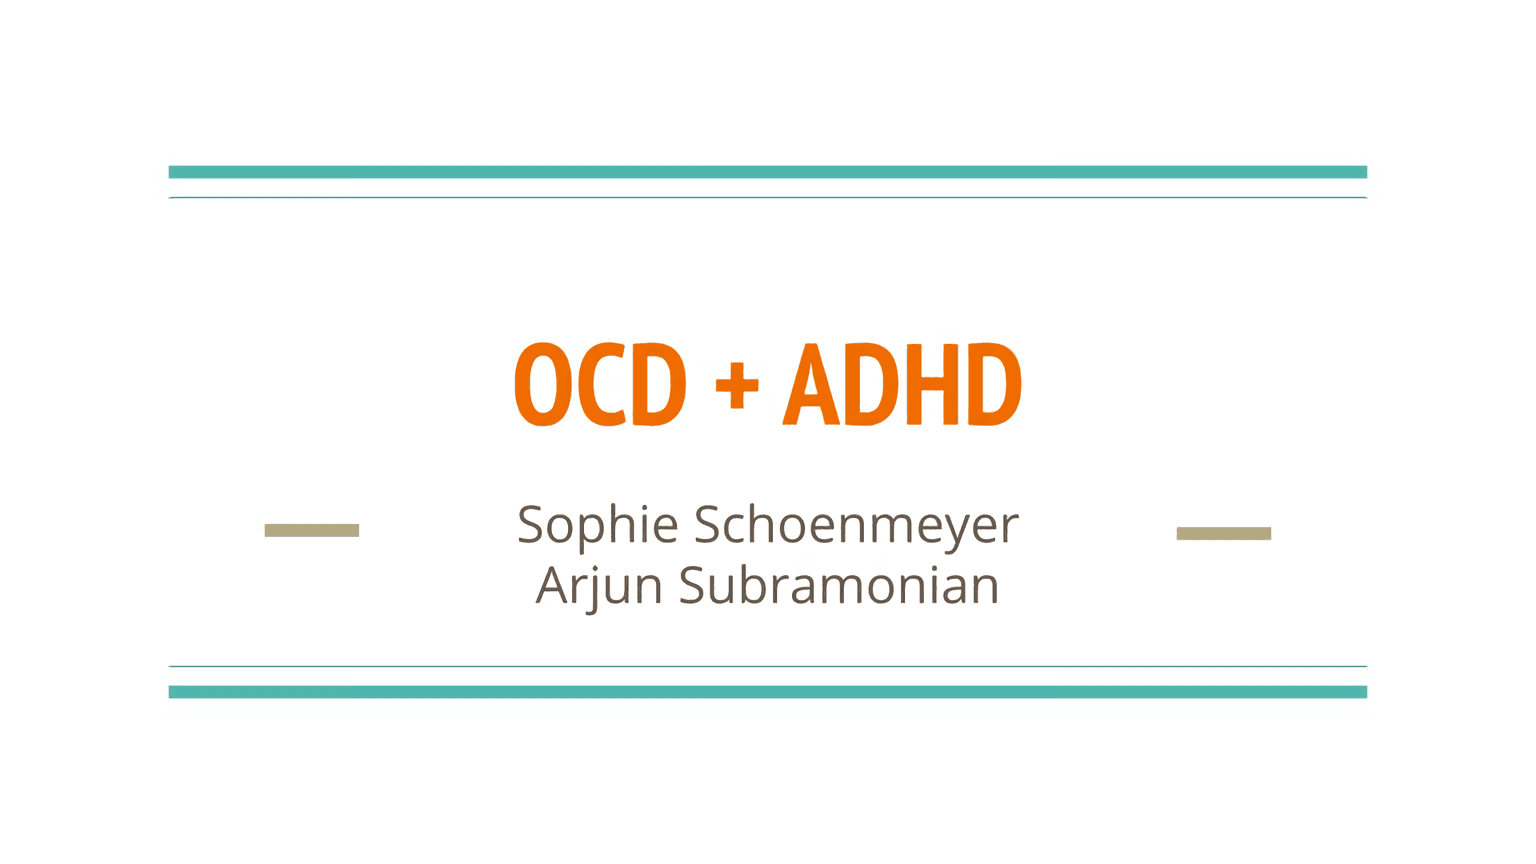 a simple slide that says "OCD + ADHD, Sophie Schoenmeyer and Arjun Subramonian"